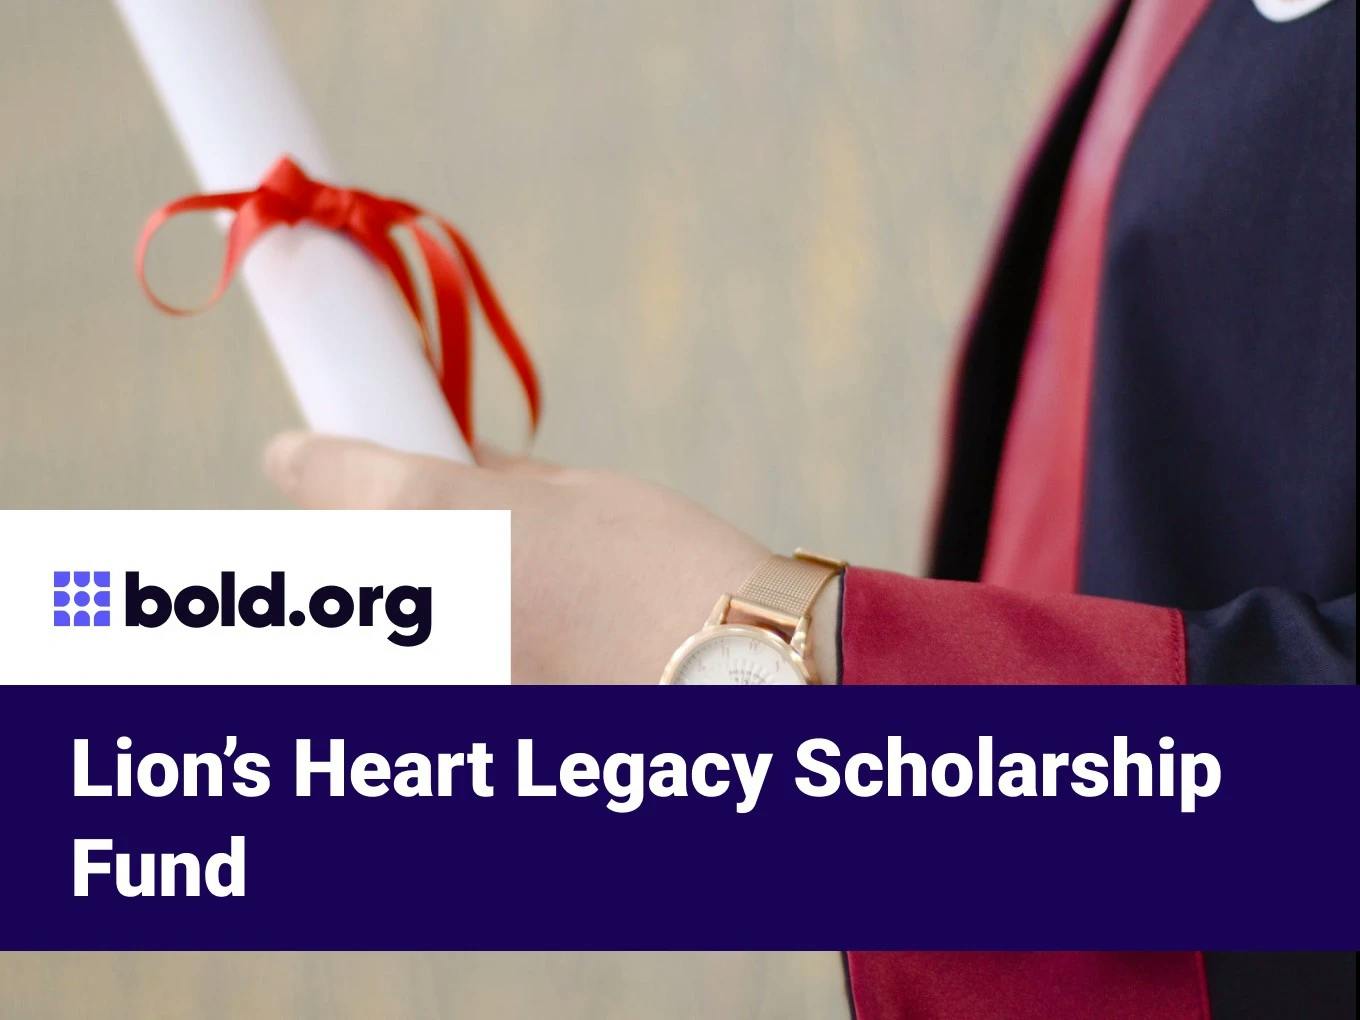 Lion’s Heart Legacy Scholarship Fund